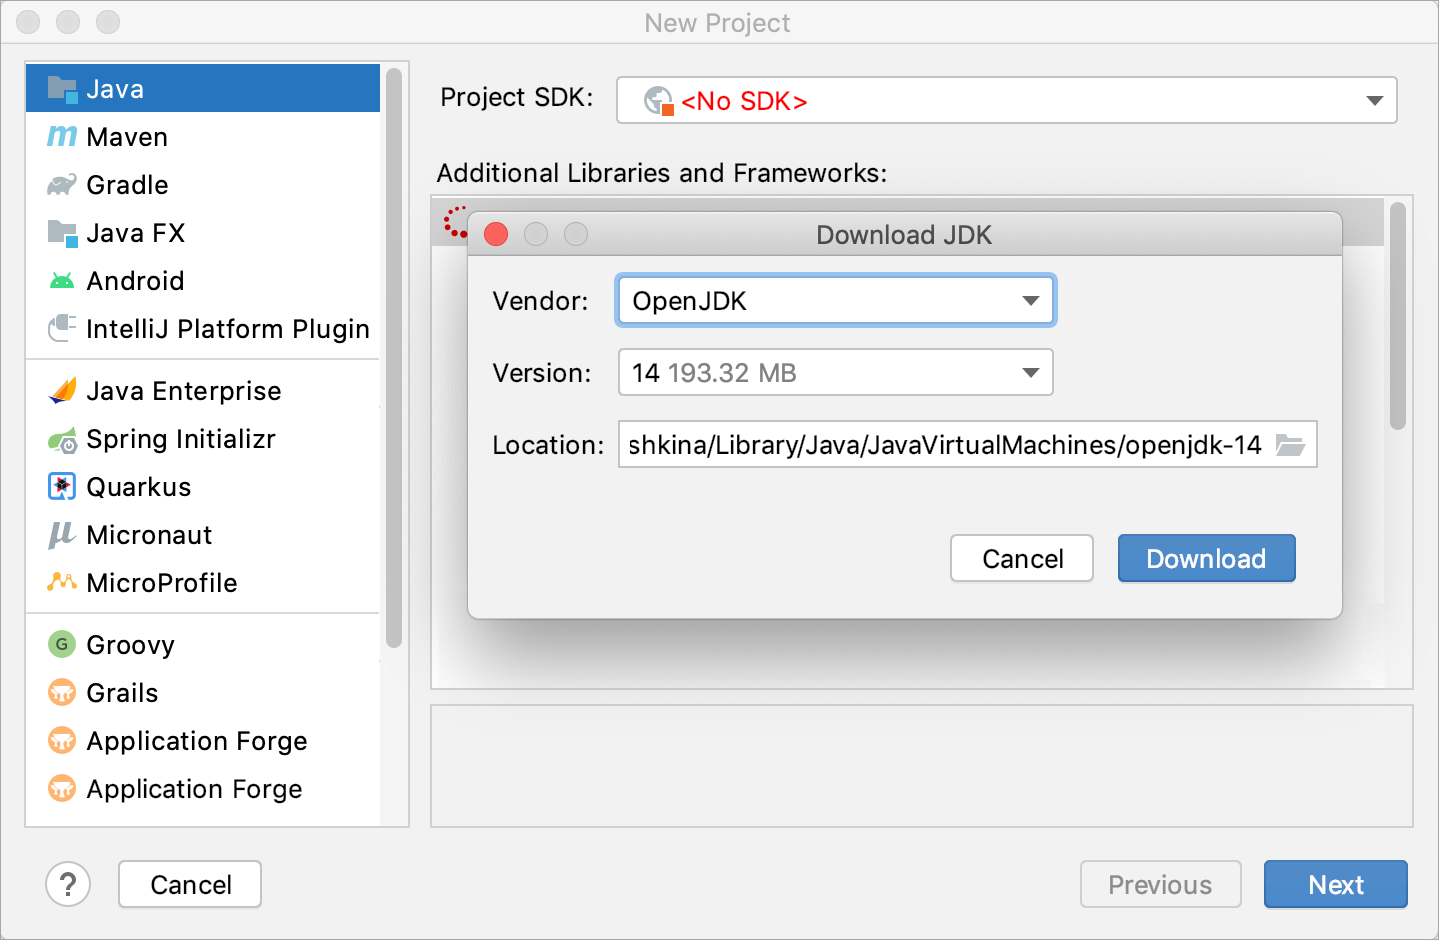 Downloading a JDK for the new project